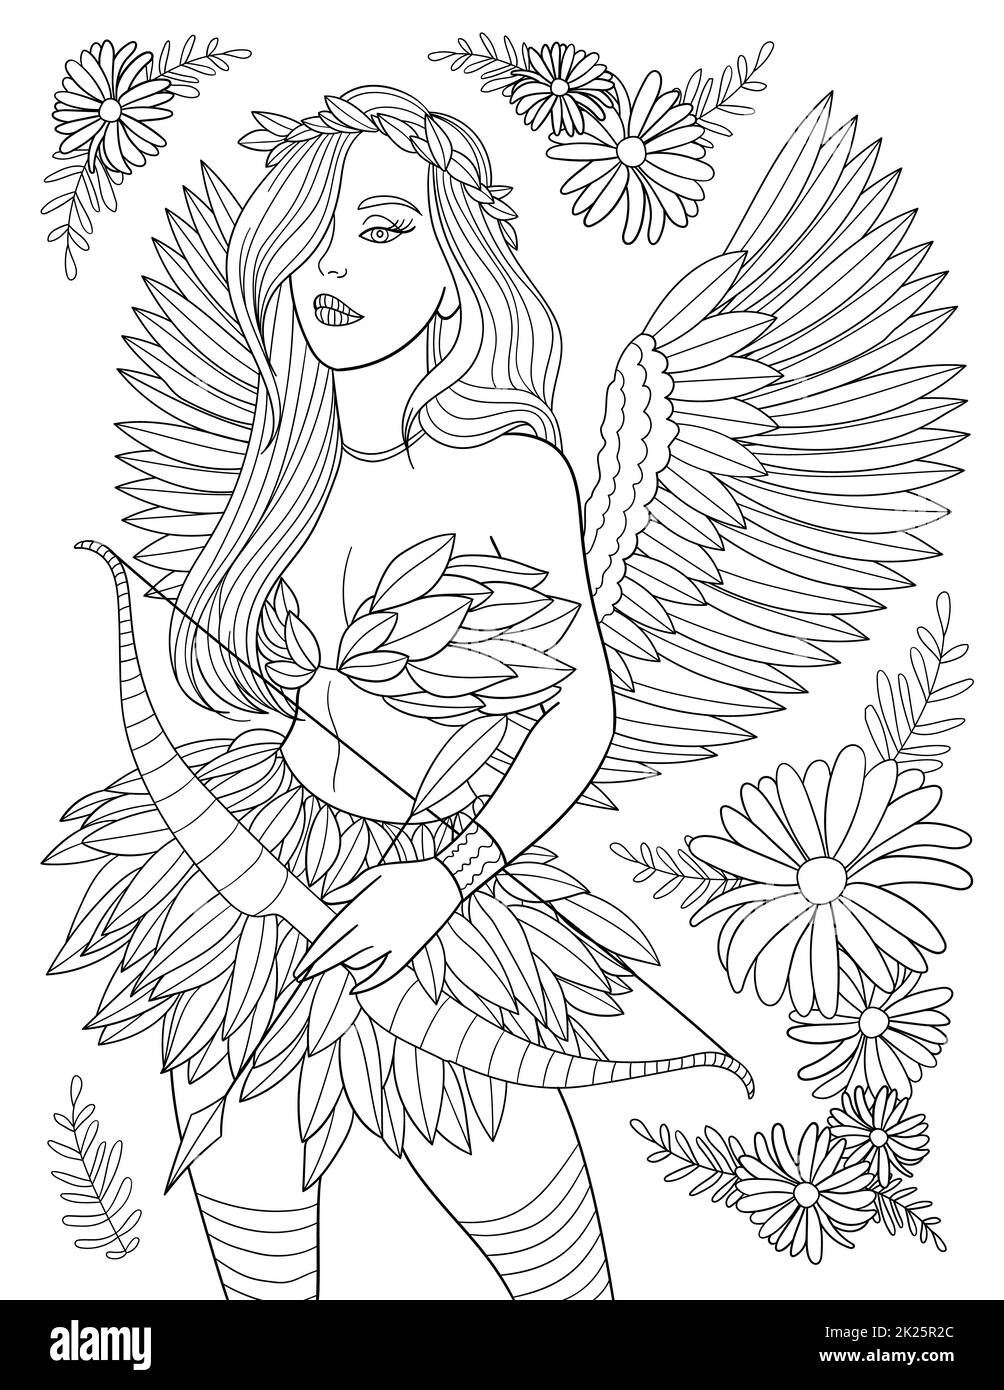 Woman Warrior - Printable Adult Coloring Page from Favoreads (Coloring book  pages for adults and kids, Coloring sheets, Coloring designs)